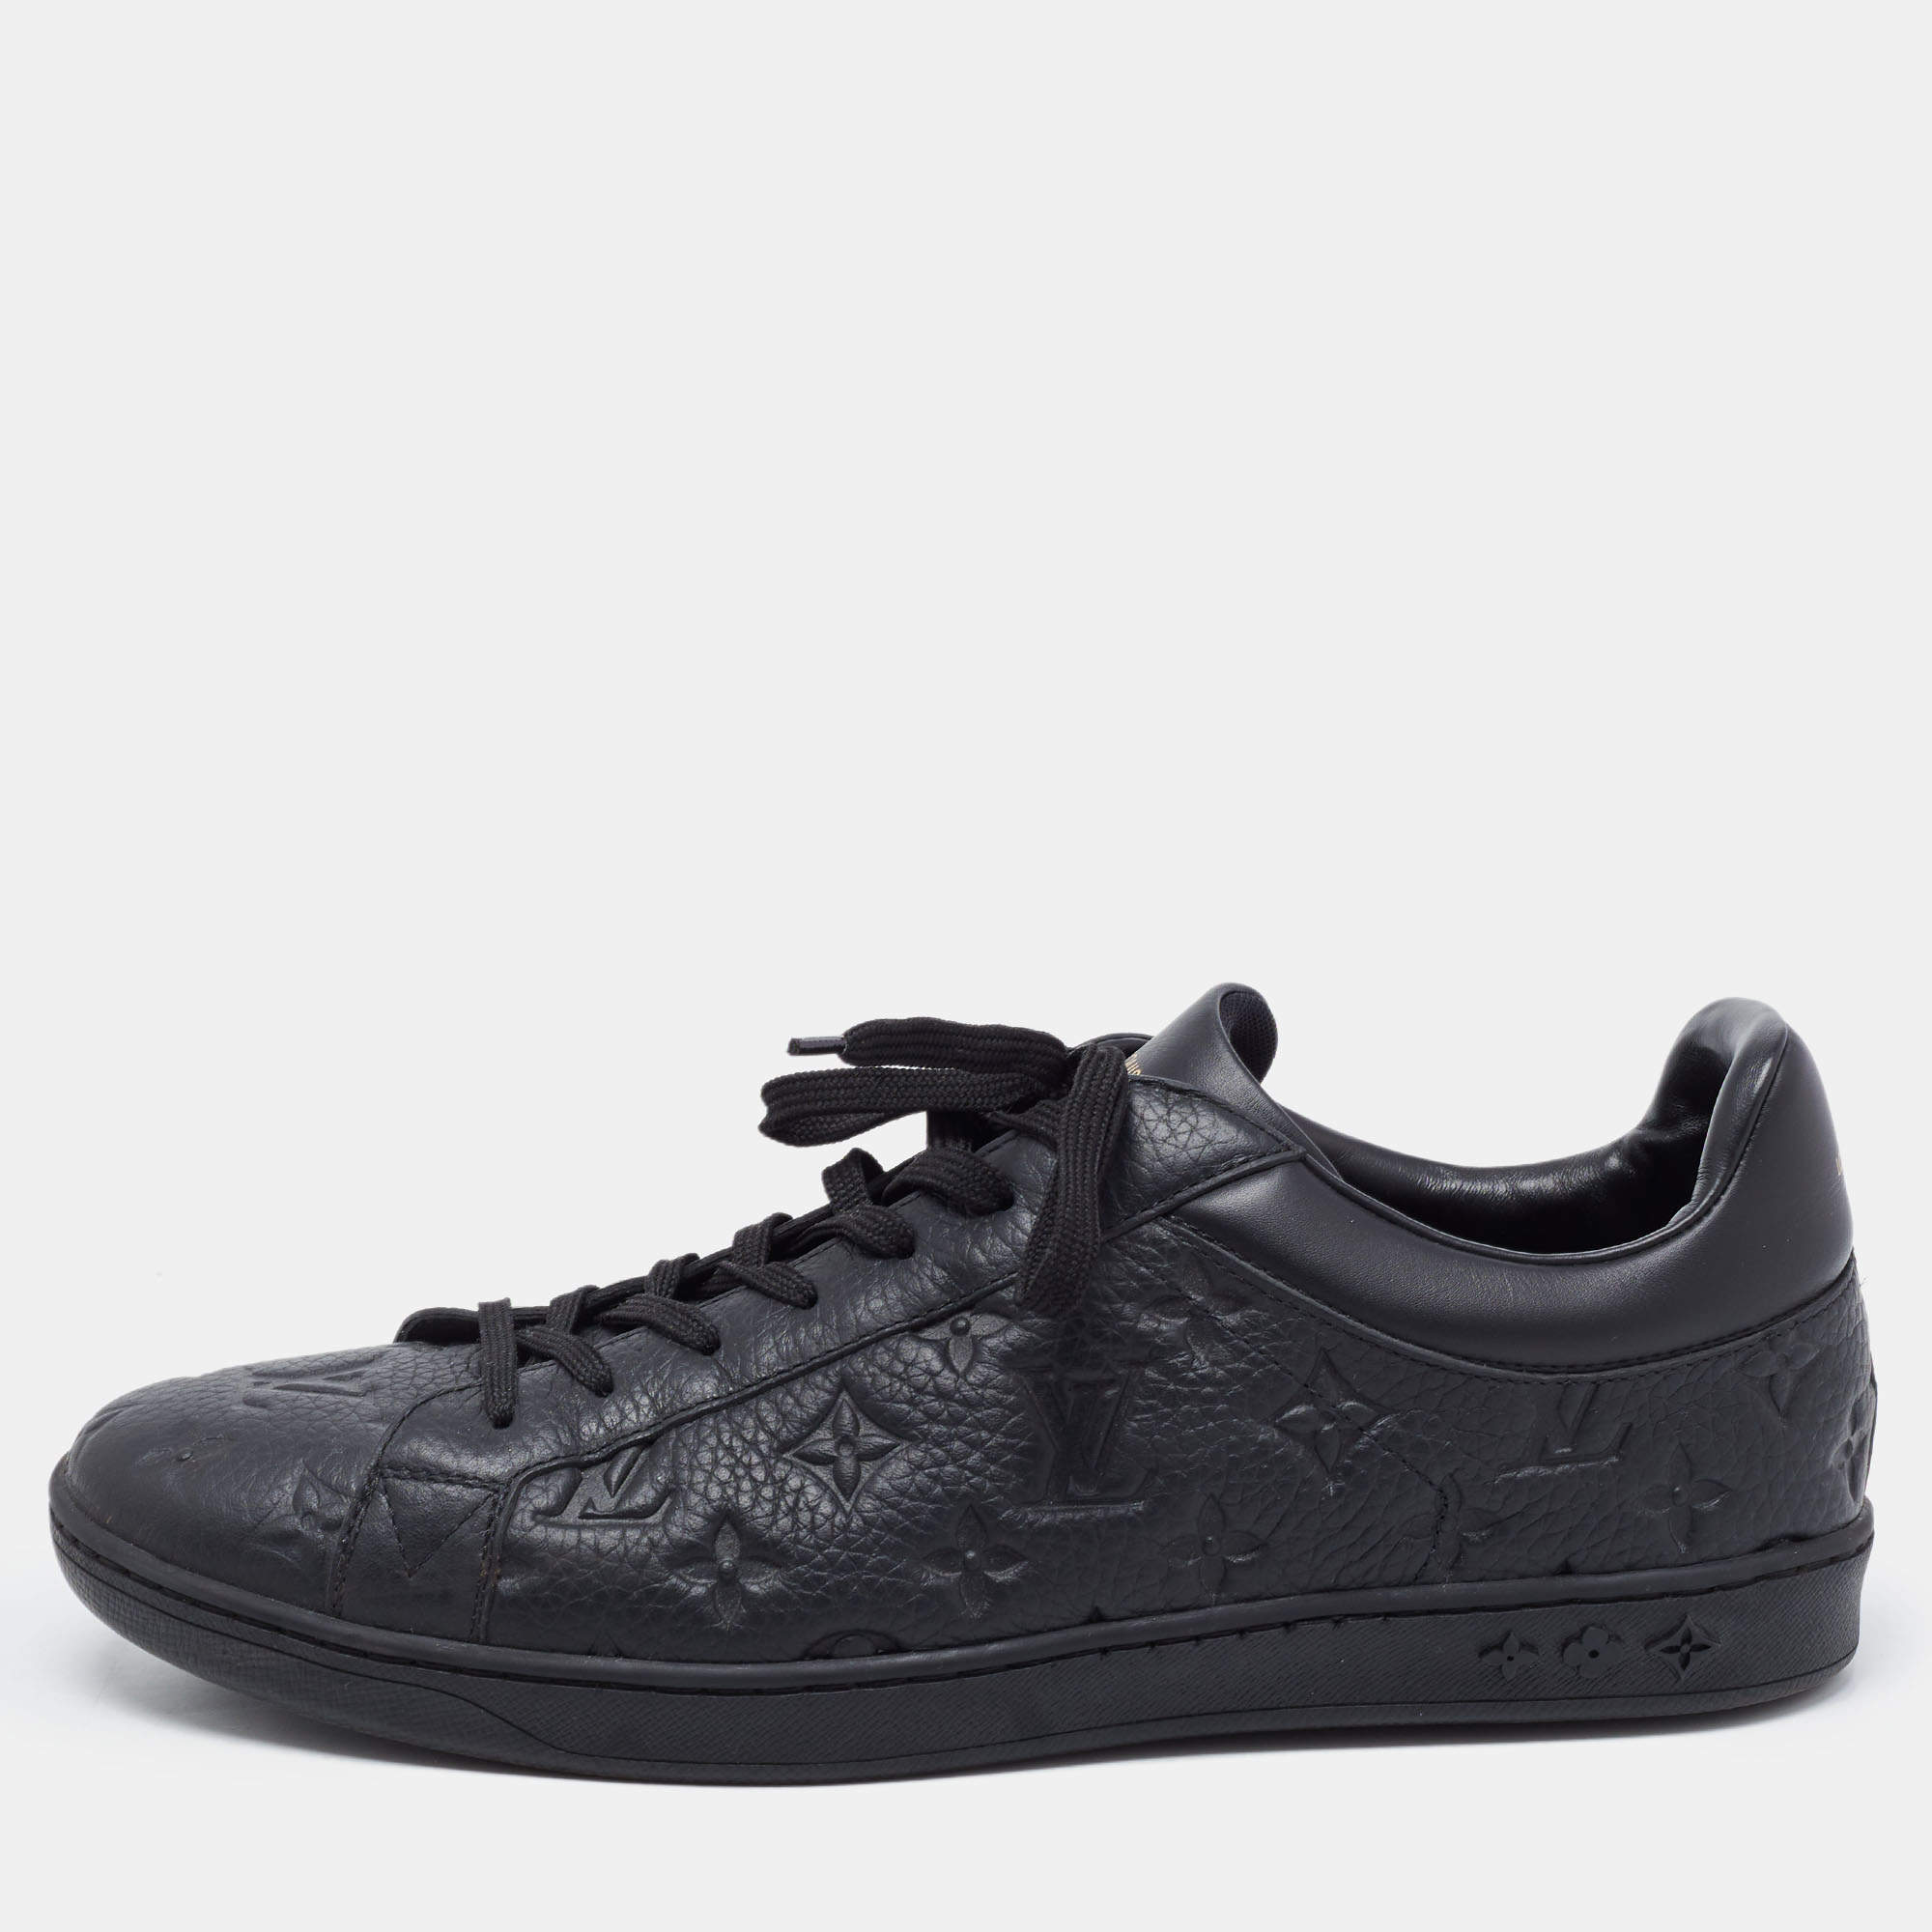 Auth. Louis Vuitton Luxembourg sneaker - all black monogram